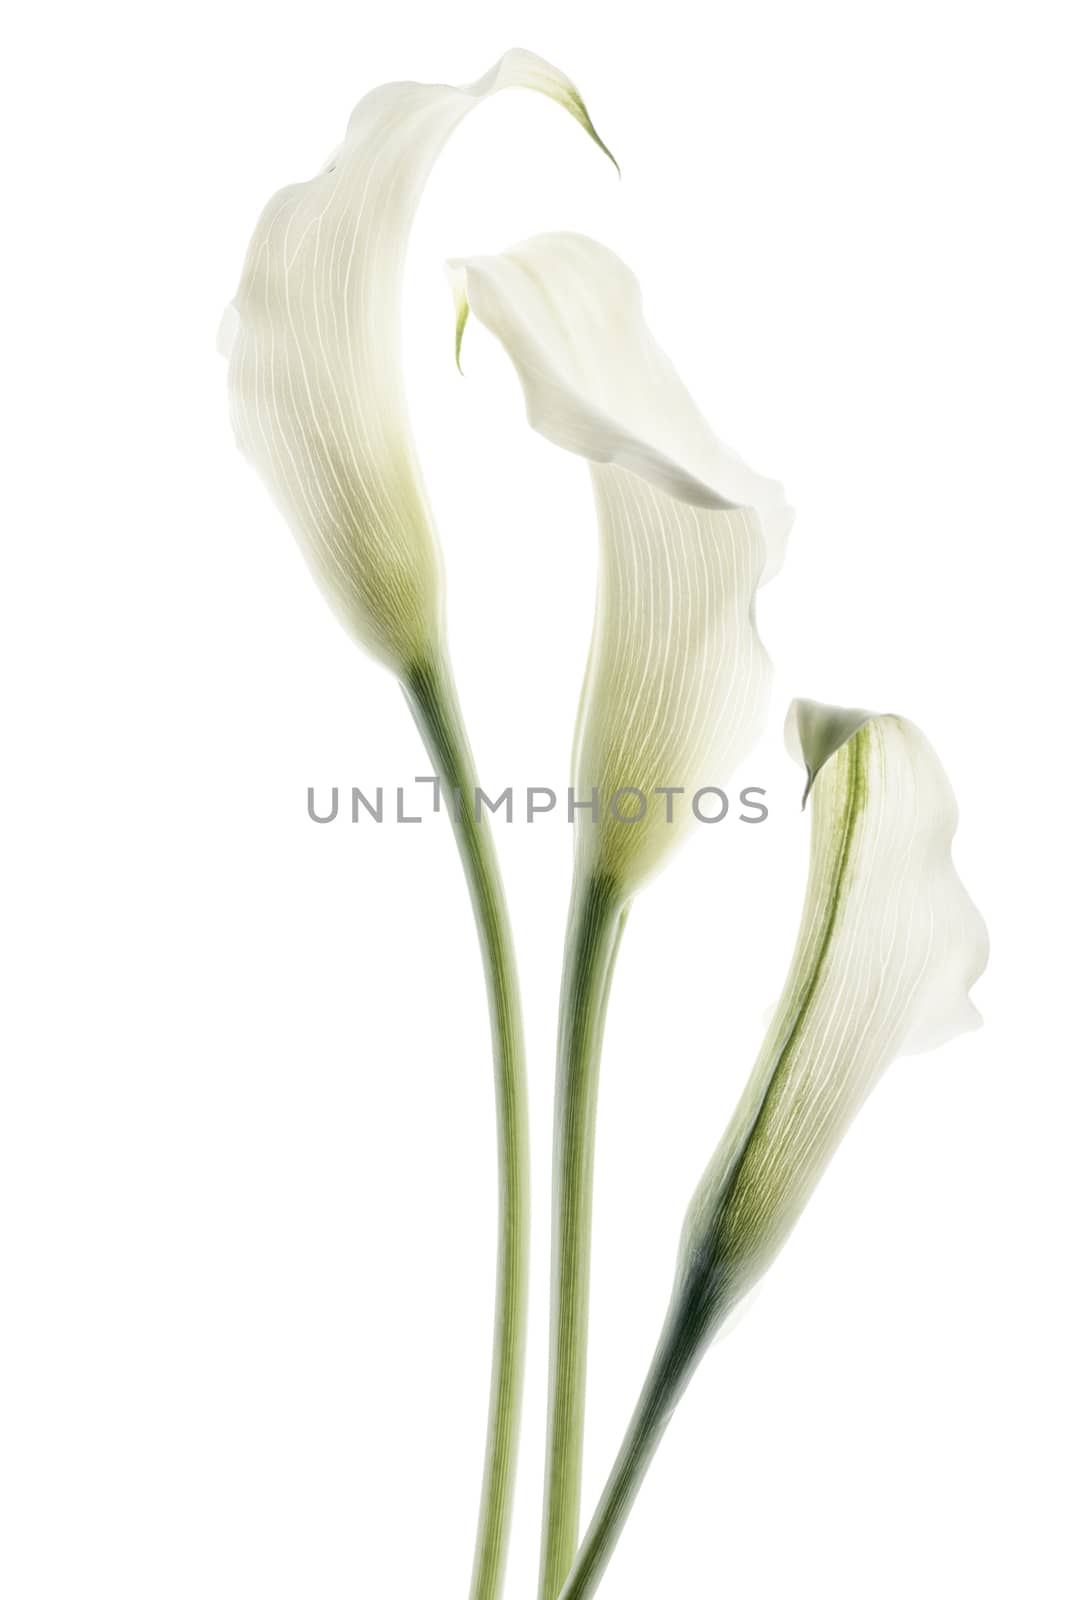 beautiful calla flowers isolated on the white background.